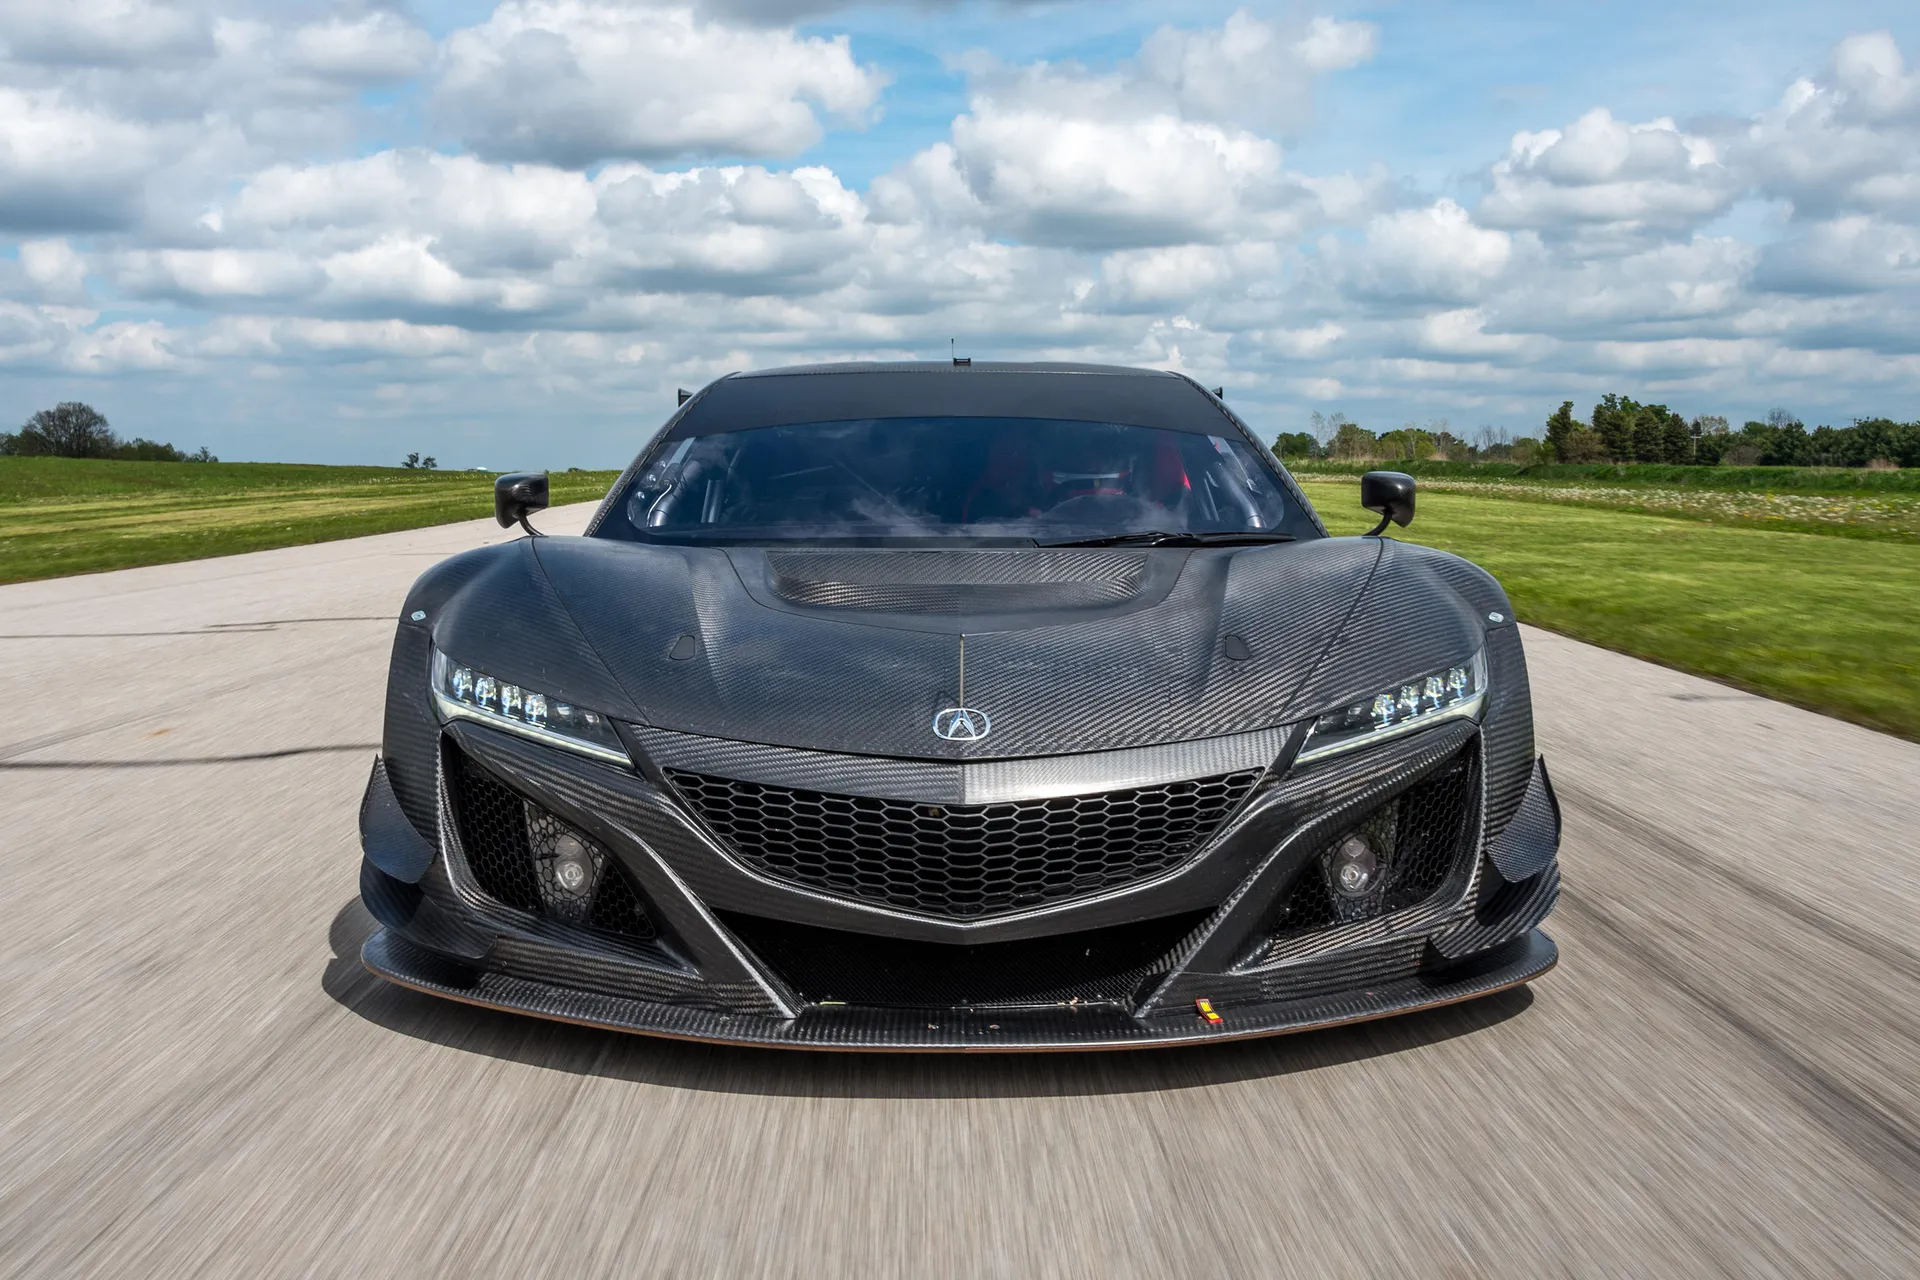 frontal view of a full carbon fibre Acura NSX GT3 race car.